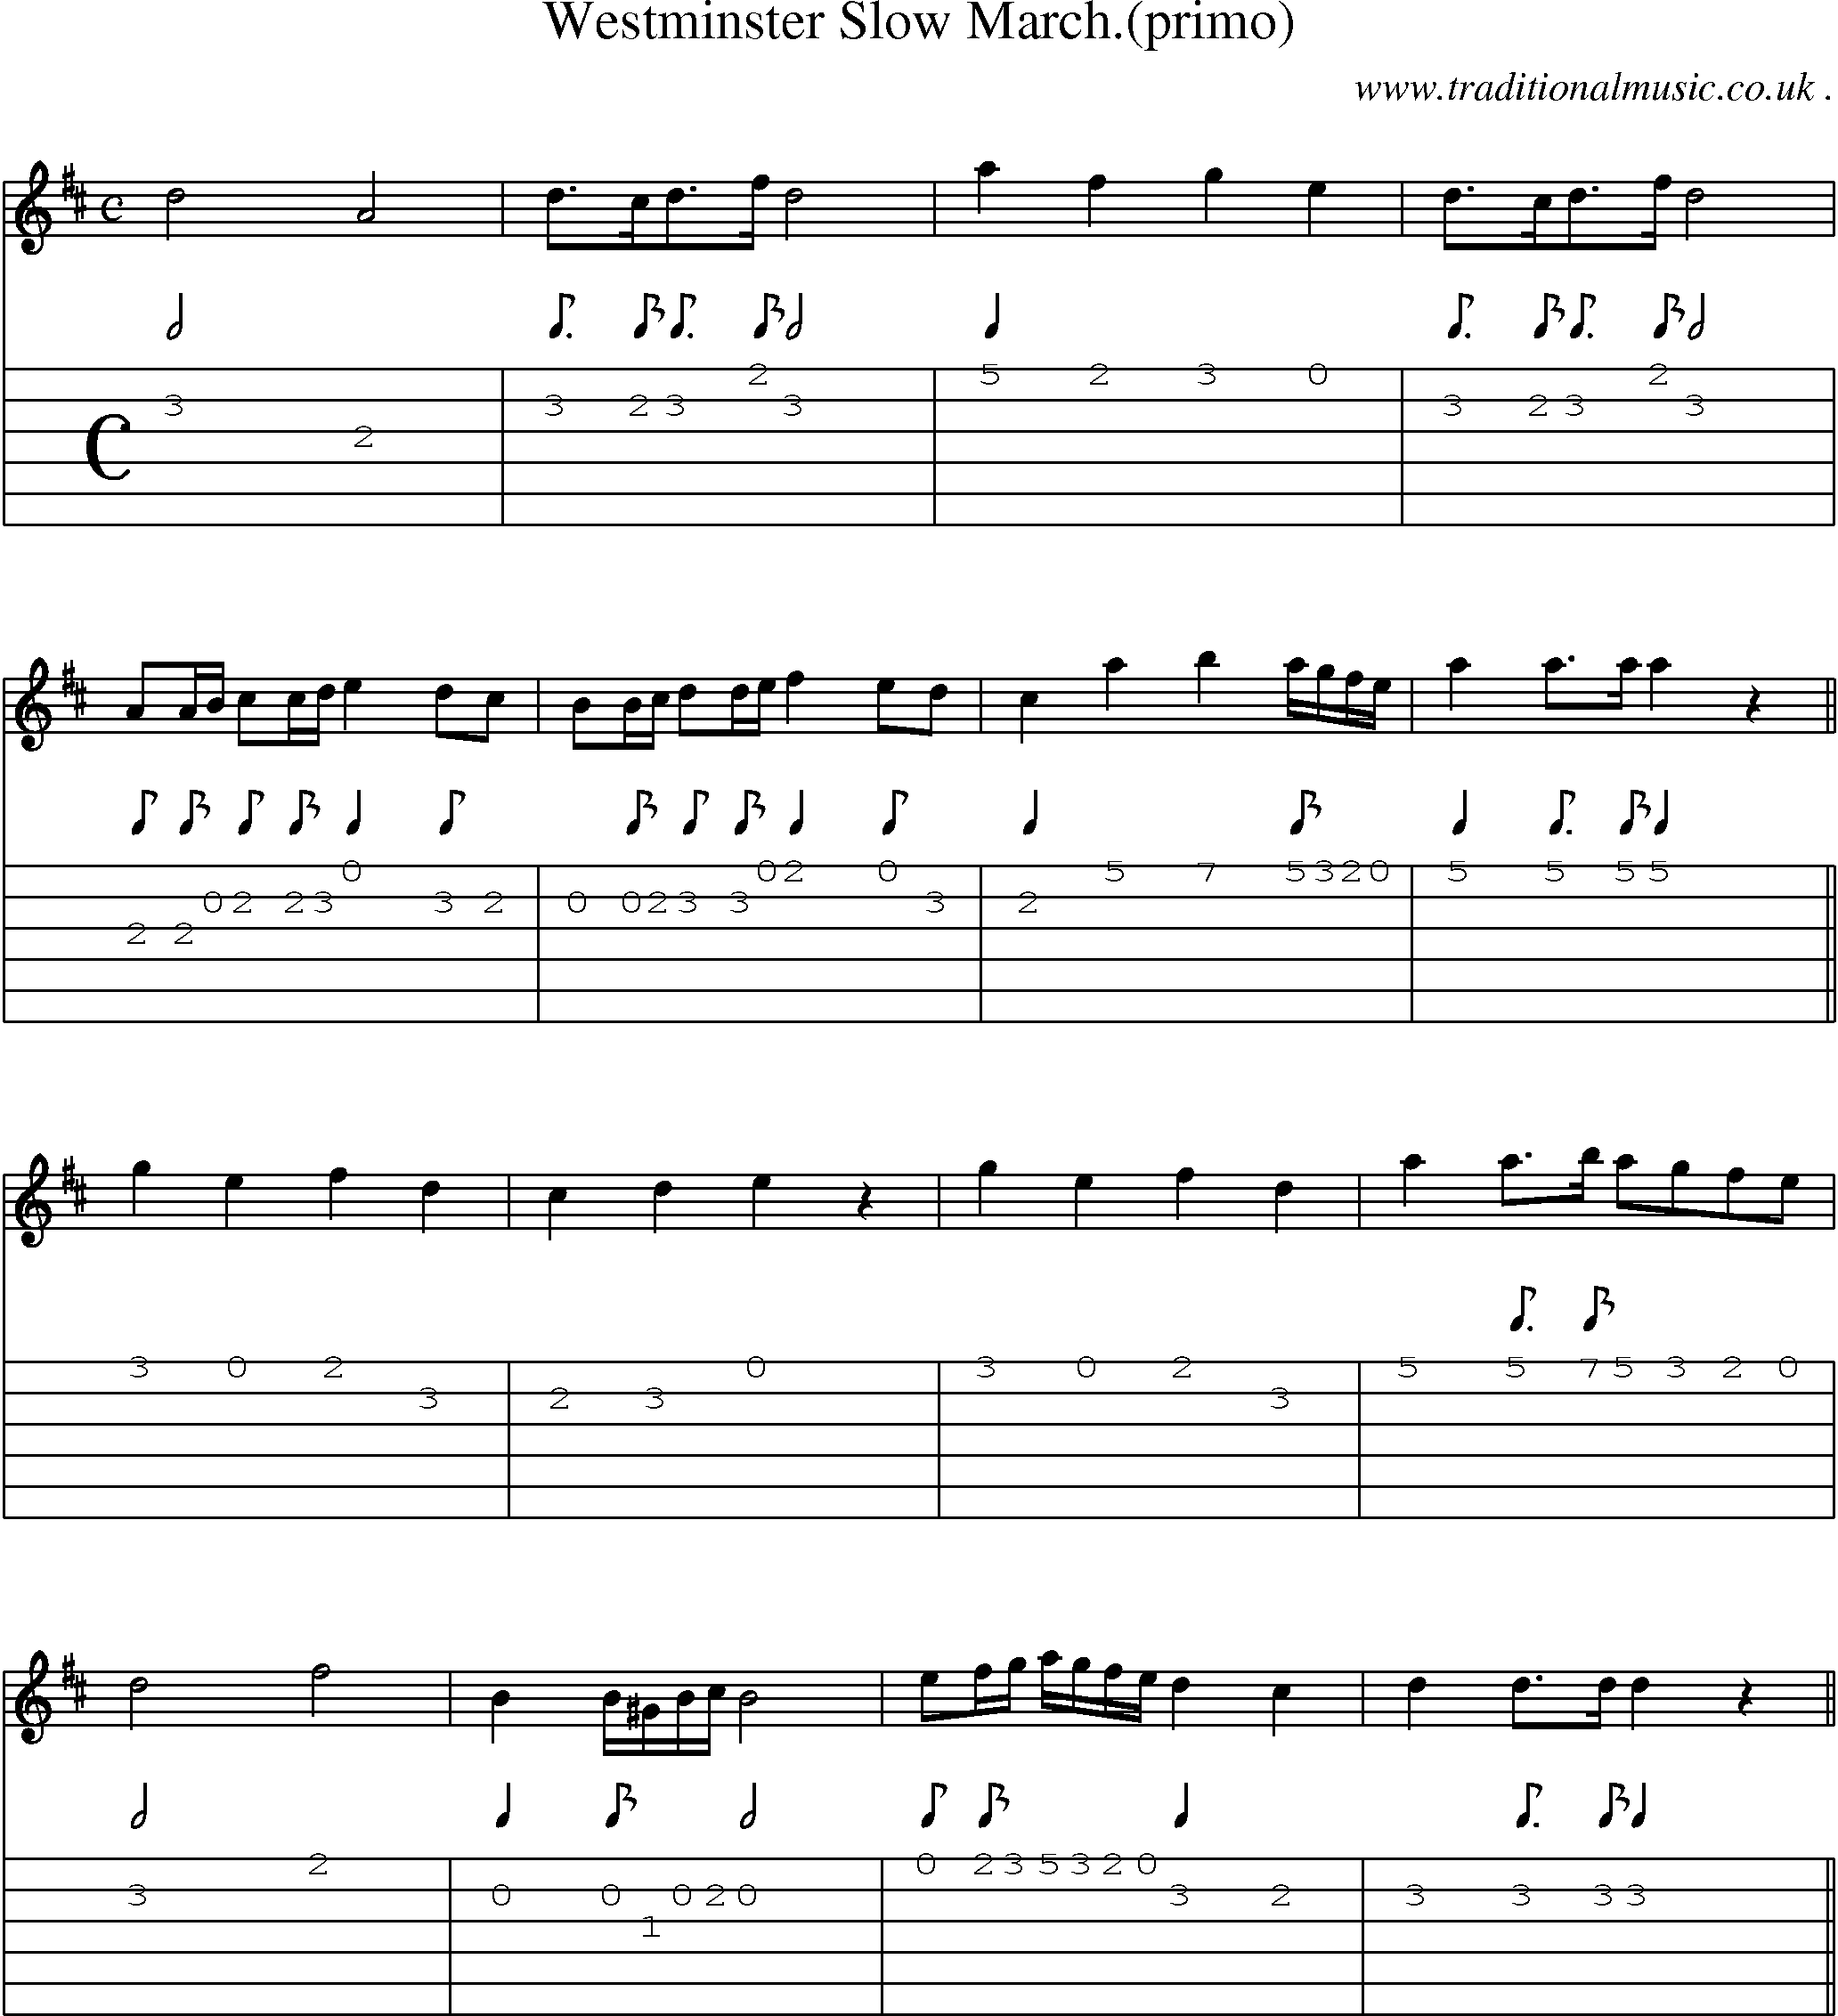 Sheet-Music and Guitar Tabs for Westminster Slow March